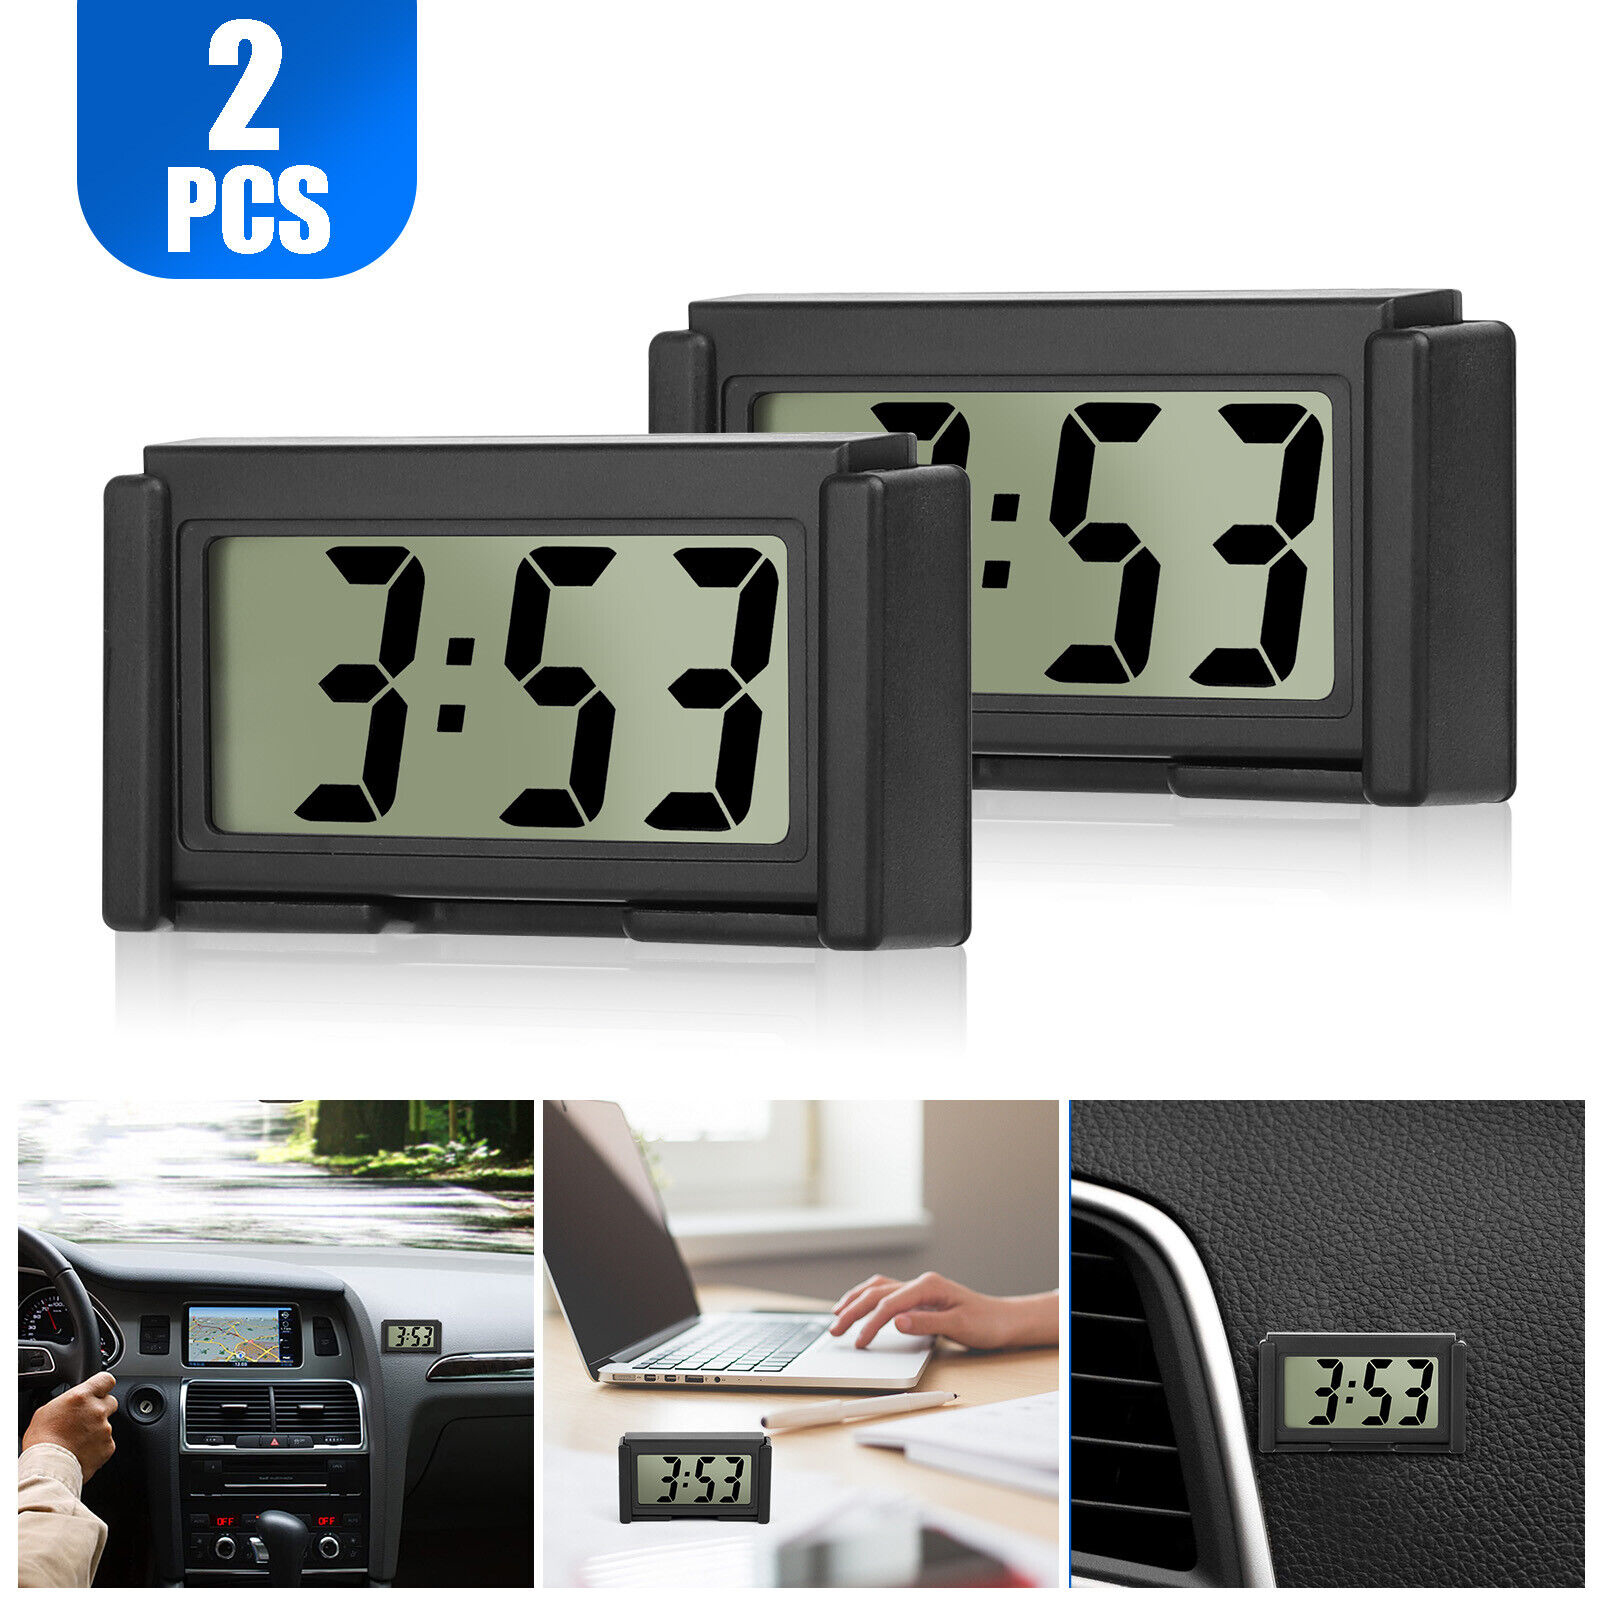 2pcs Car Dashboard Digital Clock Large Screen Digital Display Electronic Watch Clock With Adhesive Support